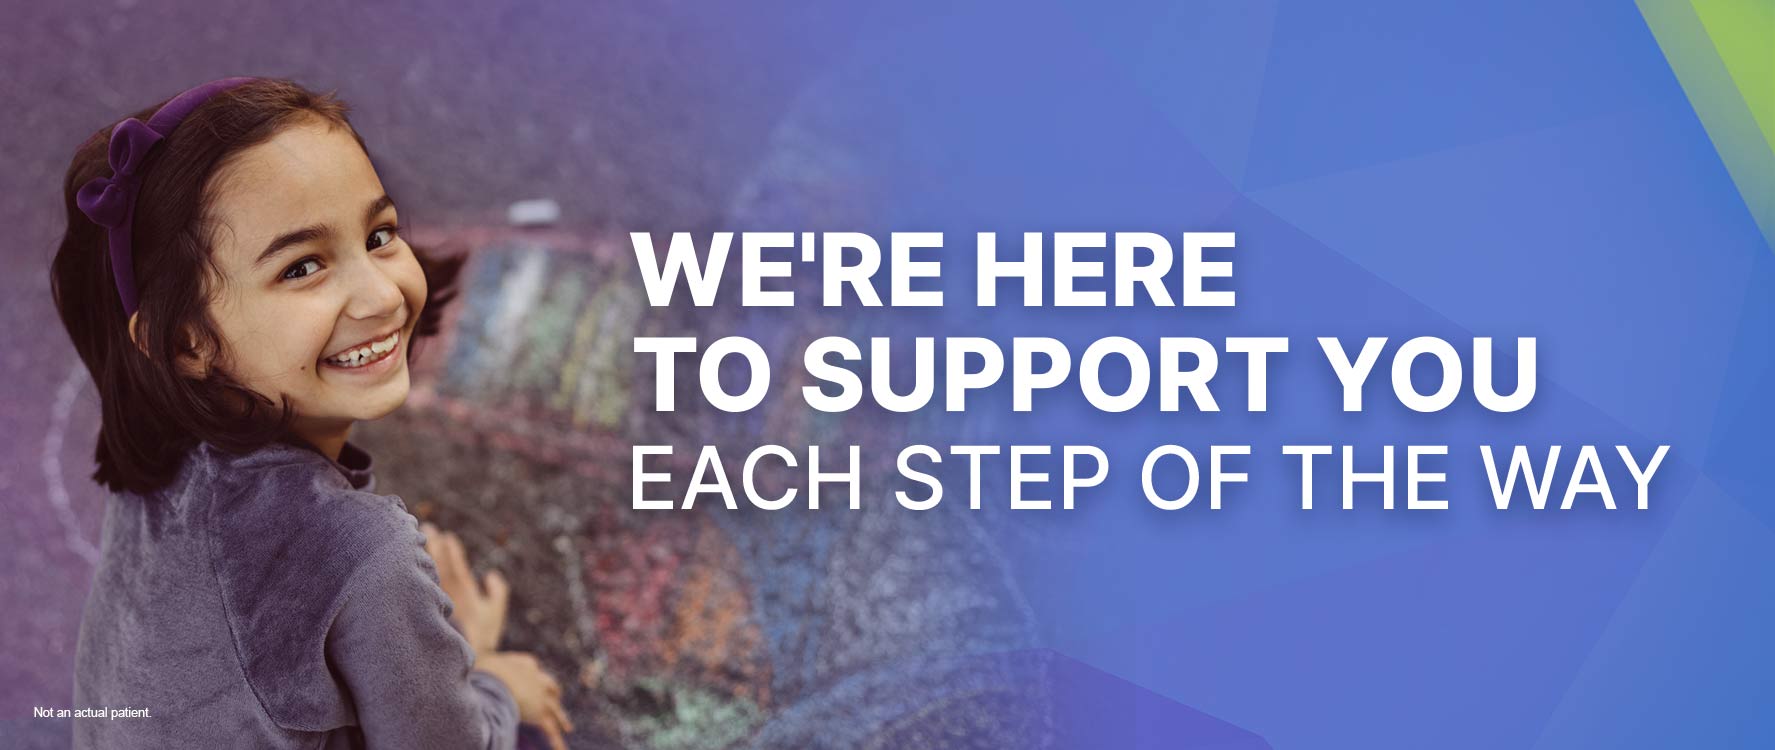 We’re here to support you each step of the way